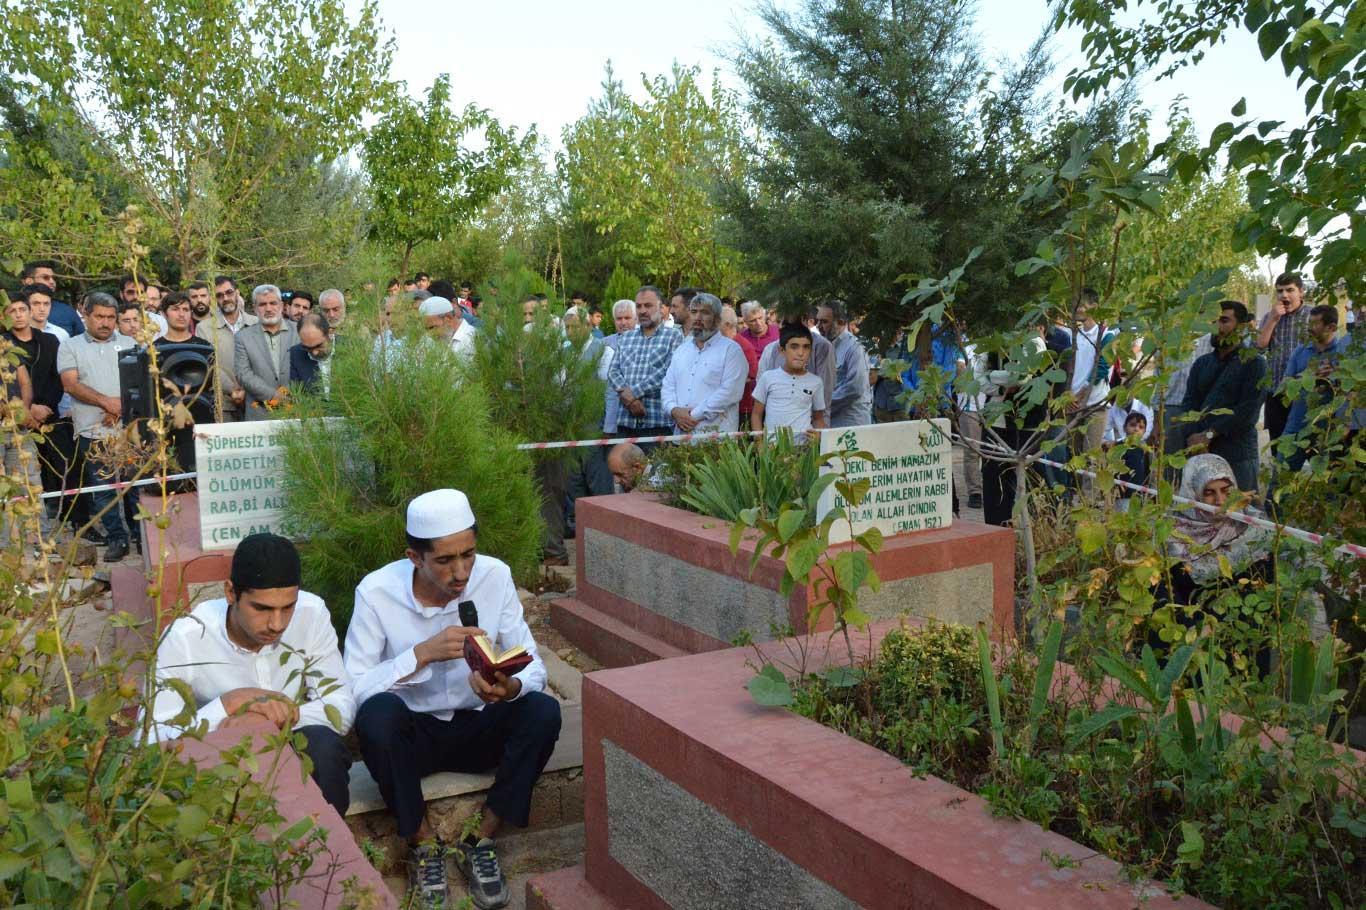 Martyrs of October 6-8 massacre commemorated upon their graves